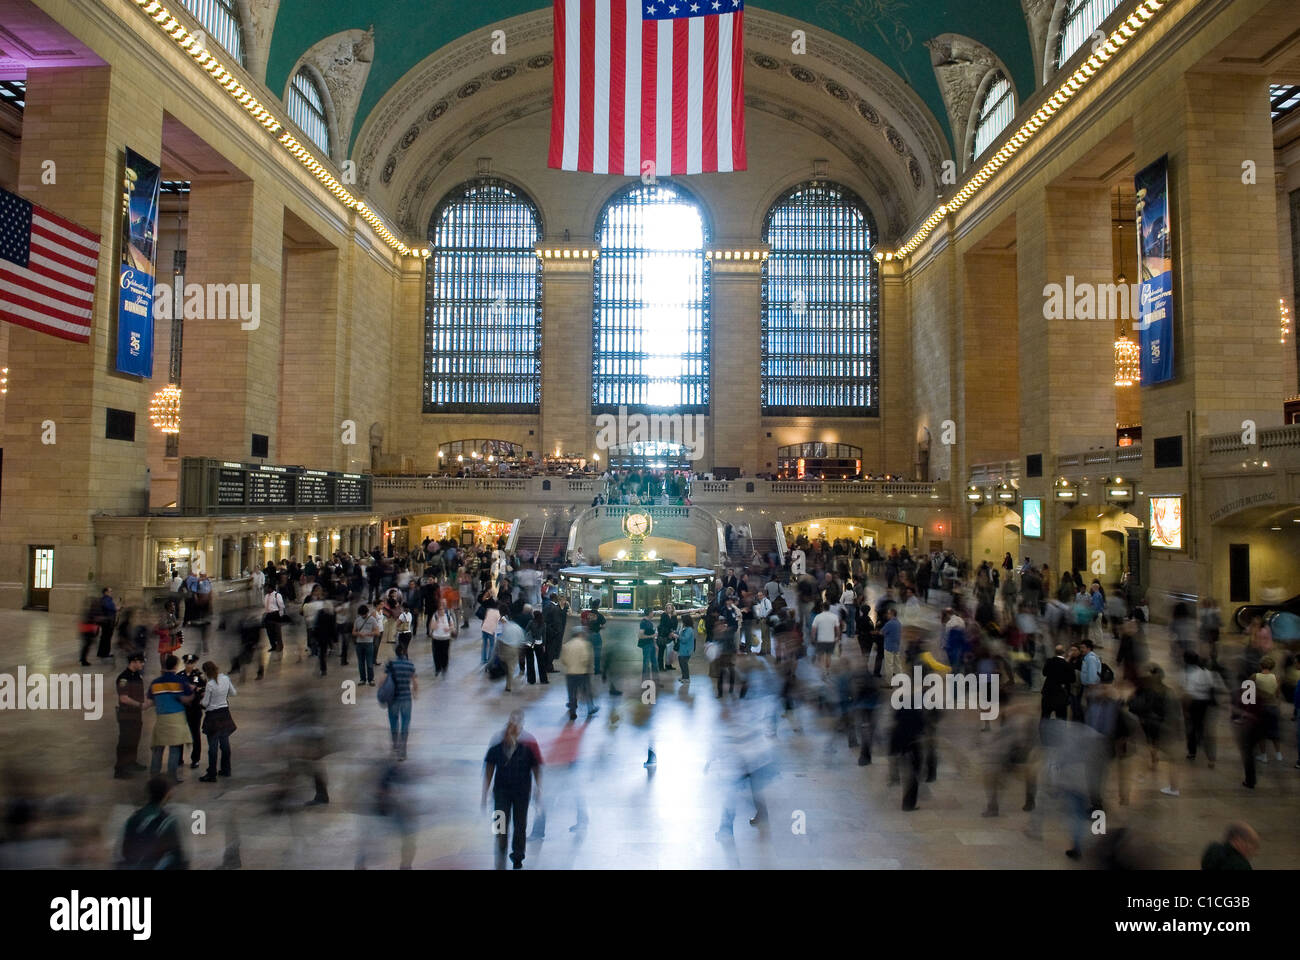 The crowded main concourse of Grand Central Station, New York City, USA Stock Photo